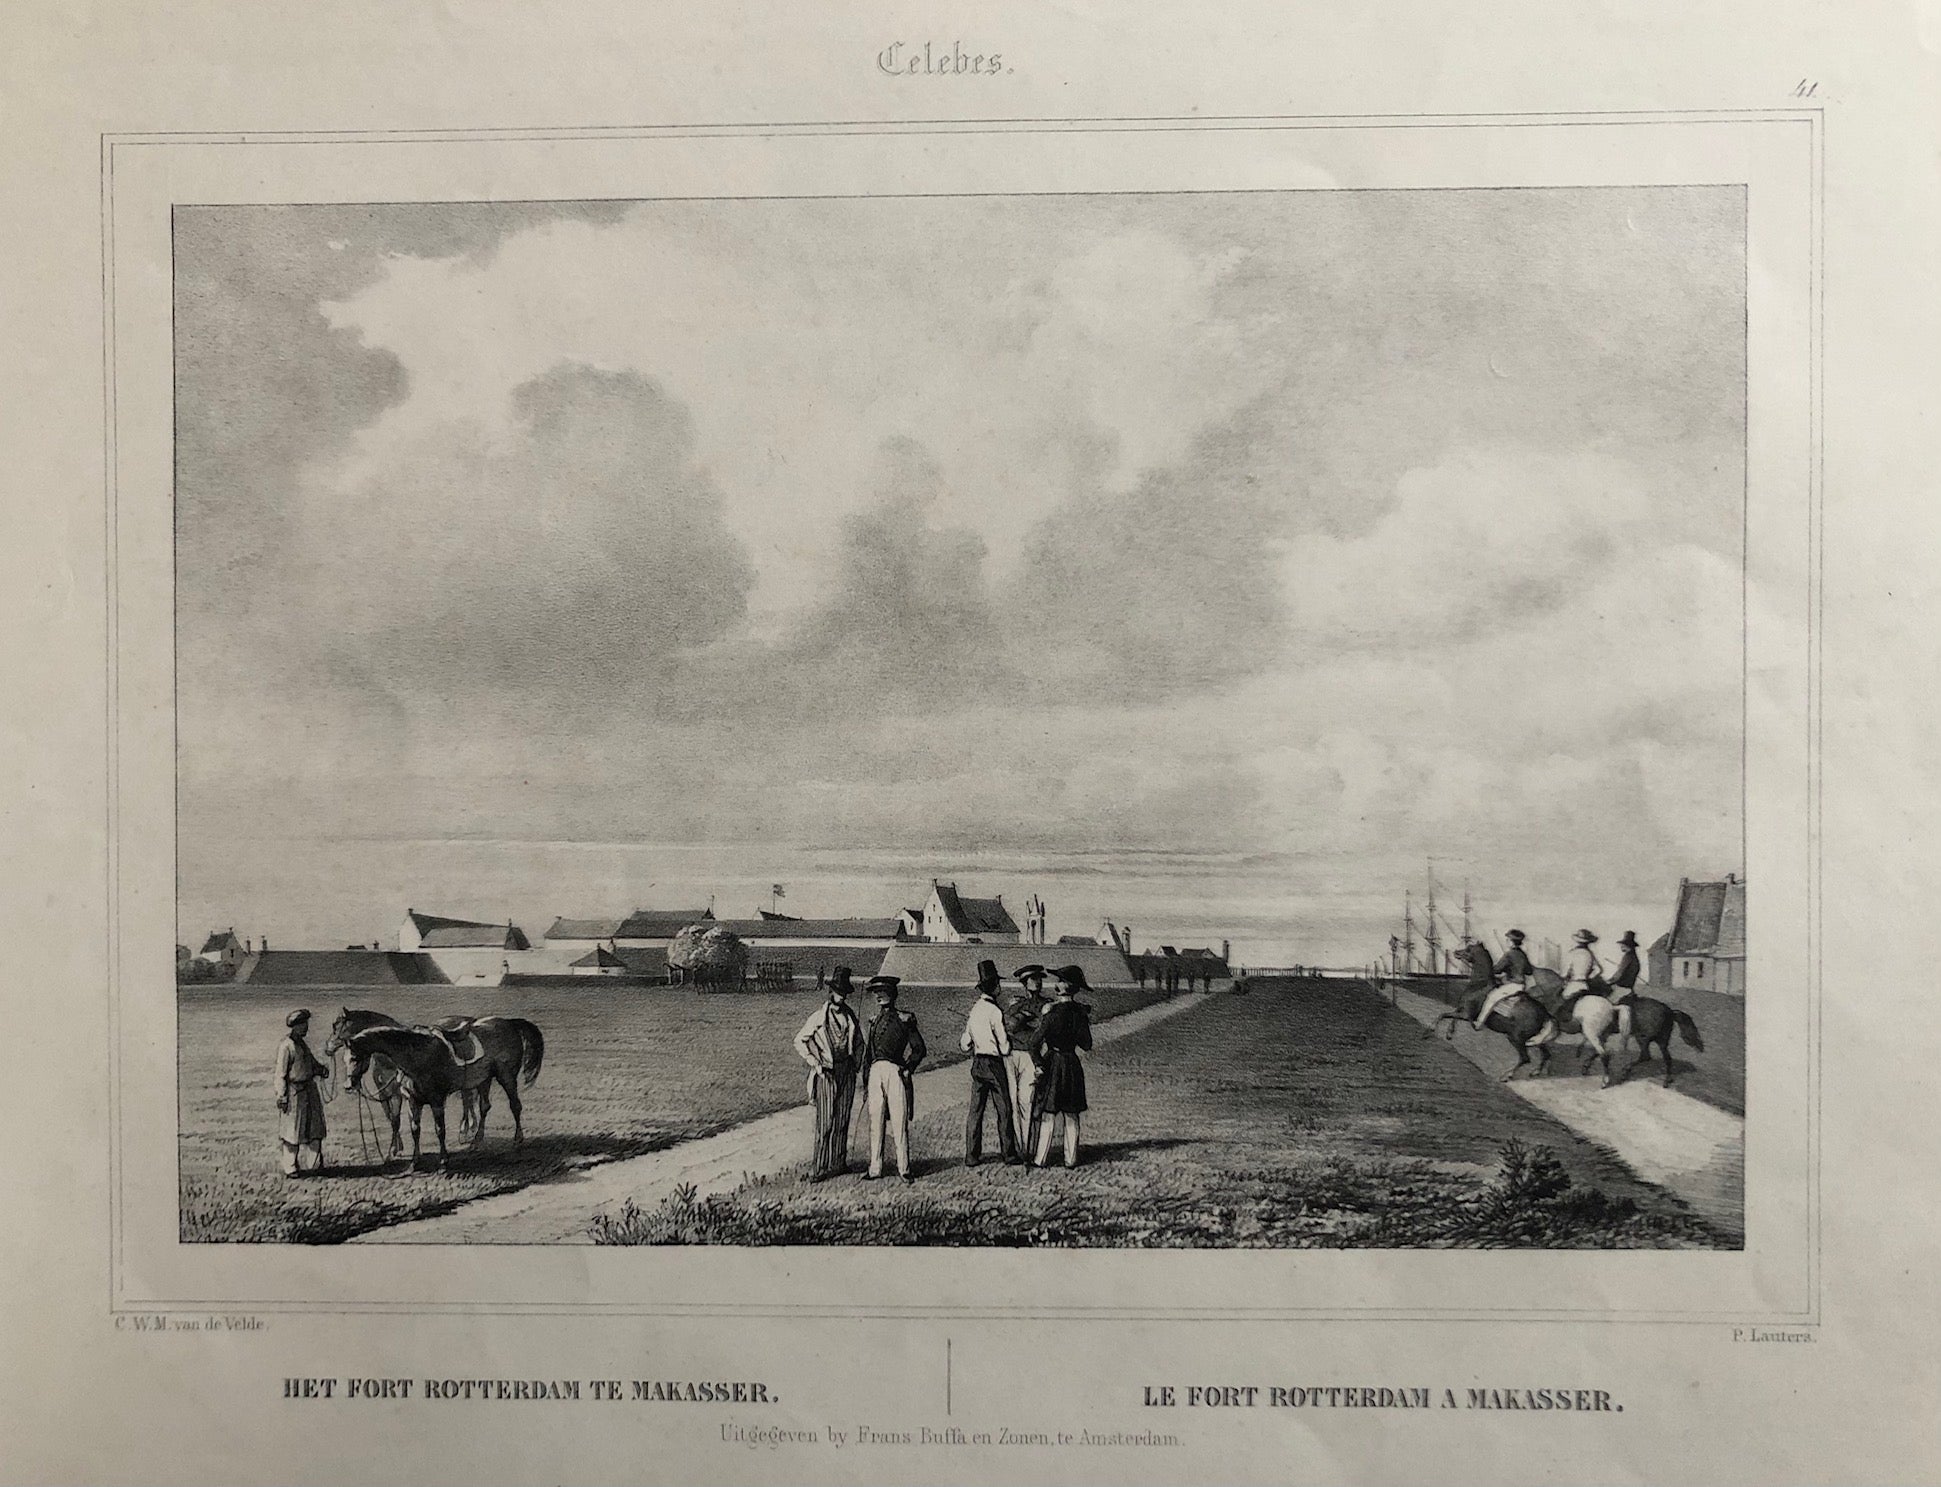  rotterdam, fort rotterdam, celebes, makasser, makassar, sulawesi, indonesia, old print, antique print, lithograph, lauters, velde, buffa, antieke prent, oude prent, lithografie, voc, indie compagnie.